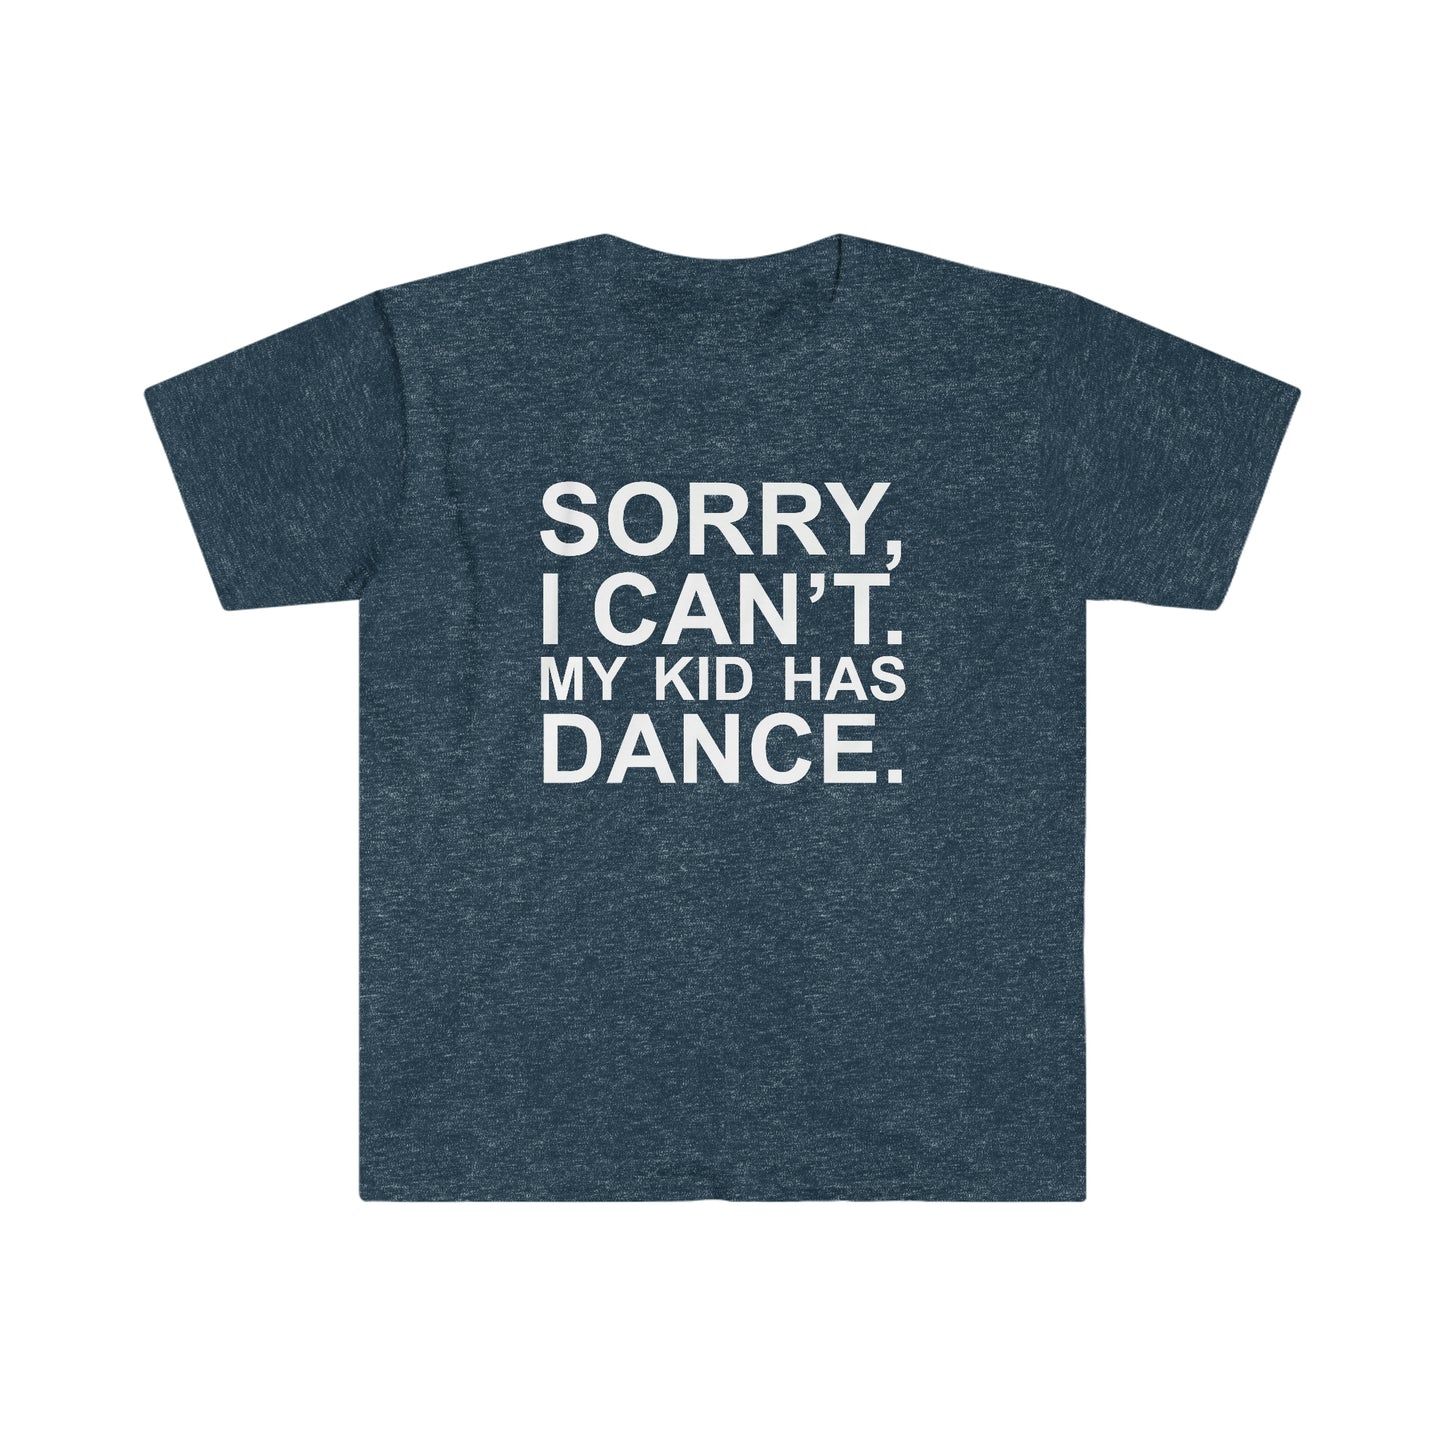 Sorry, I Can't. My Kid Has Dance Unisex Softstyle T-Shirt